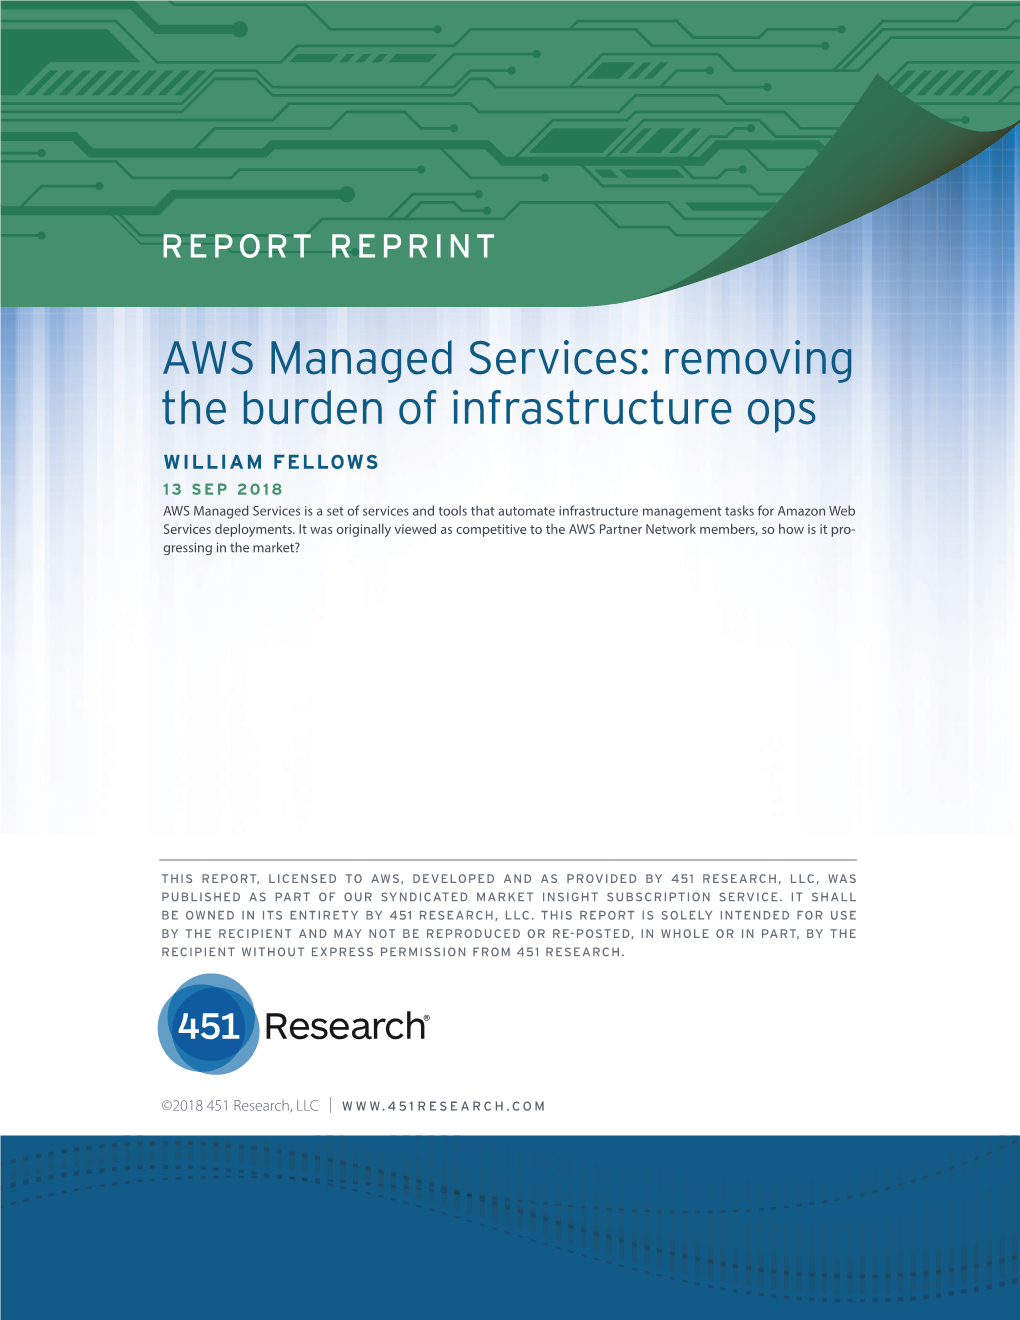 AWS Managed Services: Removing the Burden of Infrastructure